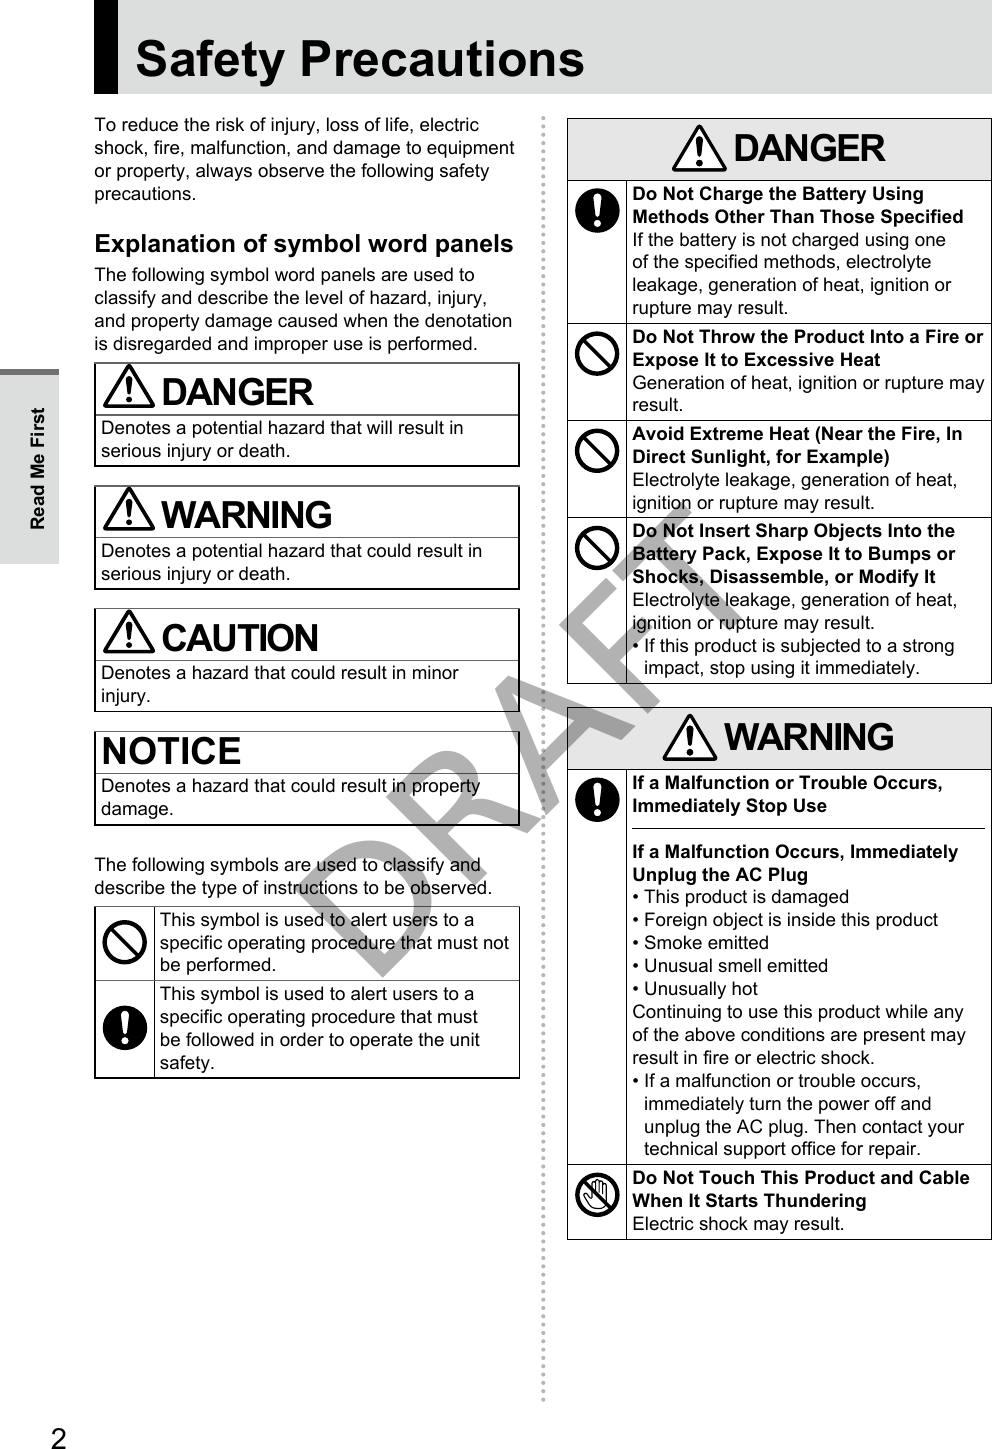 2Safety PrecautionsTo reduce the risk of injury, loss of life, electric shock, fire, malfunction, and damage to equipment or property, always observe the following safety precautions.Explanation of symbol word panelsThe following symbol word panels are used to classify and describe the level of hazard, injury, and property damage caused when the denotation is disregarded and improper use is performed. DANGERDenotes a potential hazard that will result in serious injury or death. WARNINGDenotes a potential hazard that could result in serious injury or death. CAUTIONDenotes a hazard that could result in minor injury.NOTICEDenotes a hazard that could result in property damage.The following symbols are used to classify and describe the type of instructions to be observed.This symbol is used to alert users to a specific operating procedure that must not be performed.This symbol is used to alert users to a specific operating procedure that must be followed in order to operate the unit safety. DANGERDo Not Charge the Battery Using Methods Other Than Those SpecifiedIf the battery is not charged using one of the specified methods, electrolyte leakage, generation of heat, ignition or rupture may result.Do Not Throw the Product Into a Fire or Expose It to Excessive HeatGeneration of heat, ignition or rupture may result.Avoid Extreme Heat (Near the Fire, In Direct Sunlight, for Example)Electrolyte leakage, generation of heat, ignition or rupture may result.Do Not Insert Sharp Objects Into the Battery Pack, Expose It to Bumps or Shocks, Disassemble, or Modify ItElectrolyte leakage, generation of heat, ignition or rupture may result.• If this product is subjected to a strong impact, stop using it immediately. WARNINGIf a Malfunction or Trouble Occurs, Immediately Stop UseIf a Malfunction Occurs, Immediately Unplug the AC Plug• This product is damaged• Foreign object is inside this product• Smoke emitted• Unusual smell emitted• Unusually hotContinuing to use this product while any of the above conditions are present may result in fire or electric shock.• If a malfunction or trouble occurs, immediately turn the power off and unplug the AC plug. Then contact your technical support office for repair.Do Not Touch This Product and Cable When It Starts ThunderingElectric shock may result.Read Me FirstDRAFT